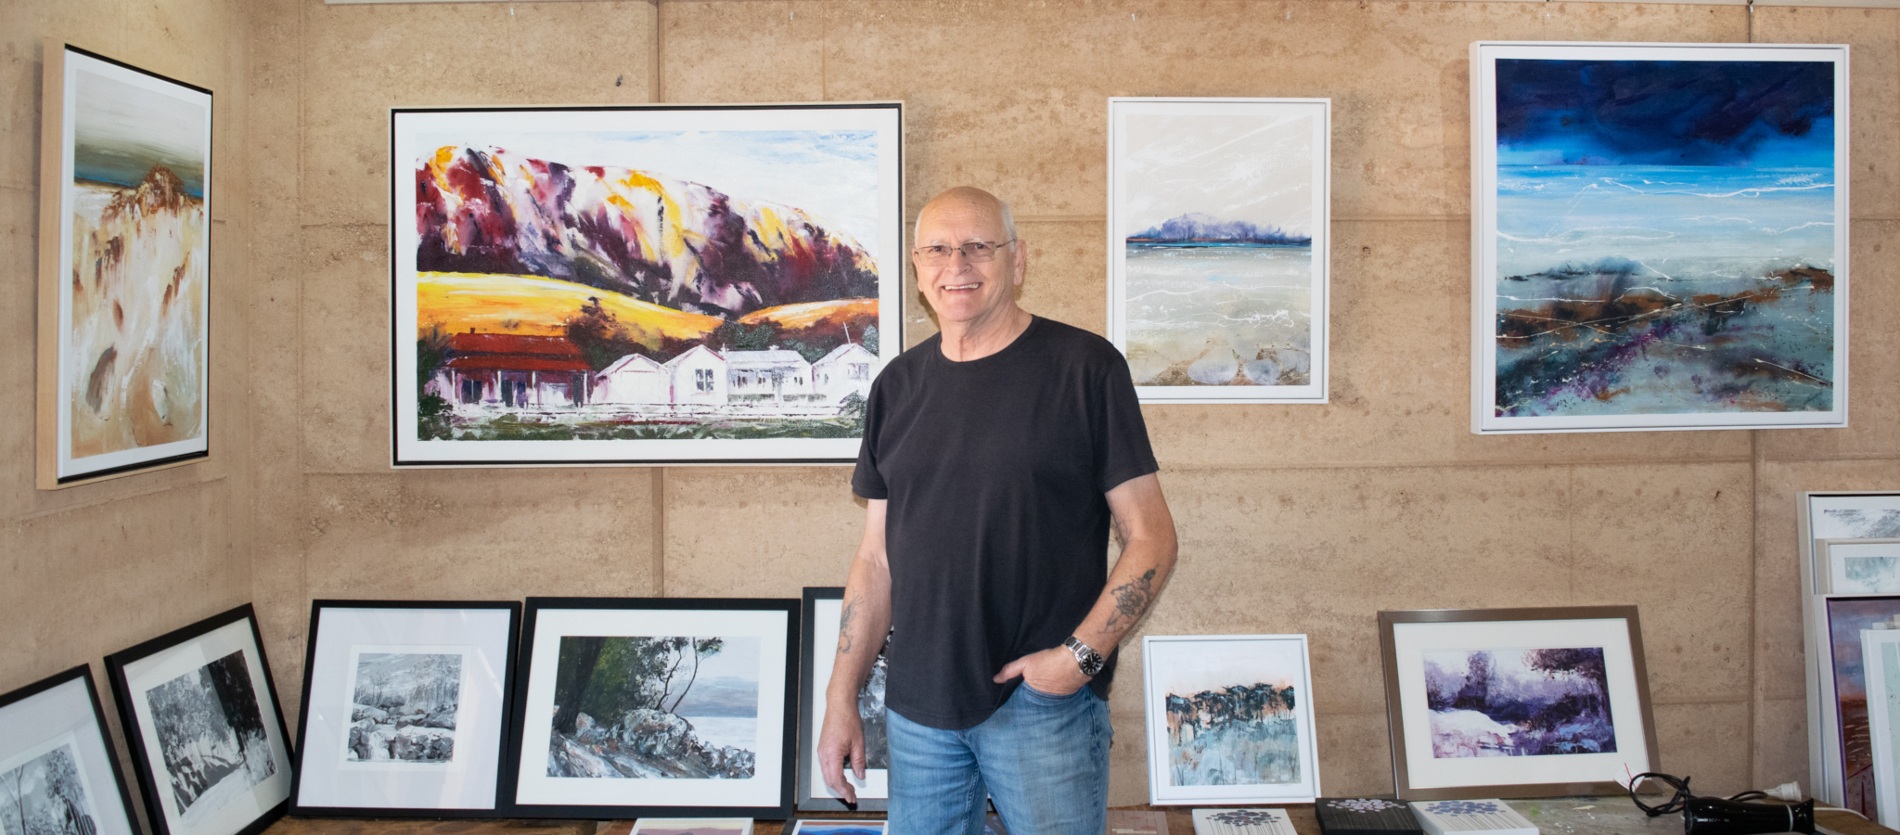 George Hayward in front of a collection of art pieces